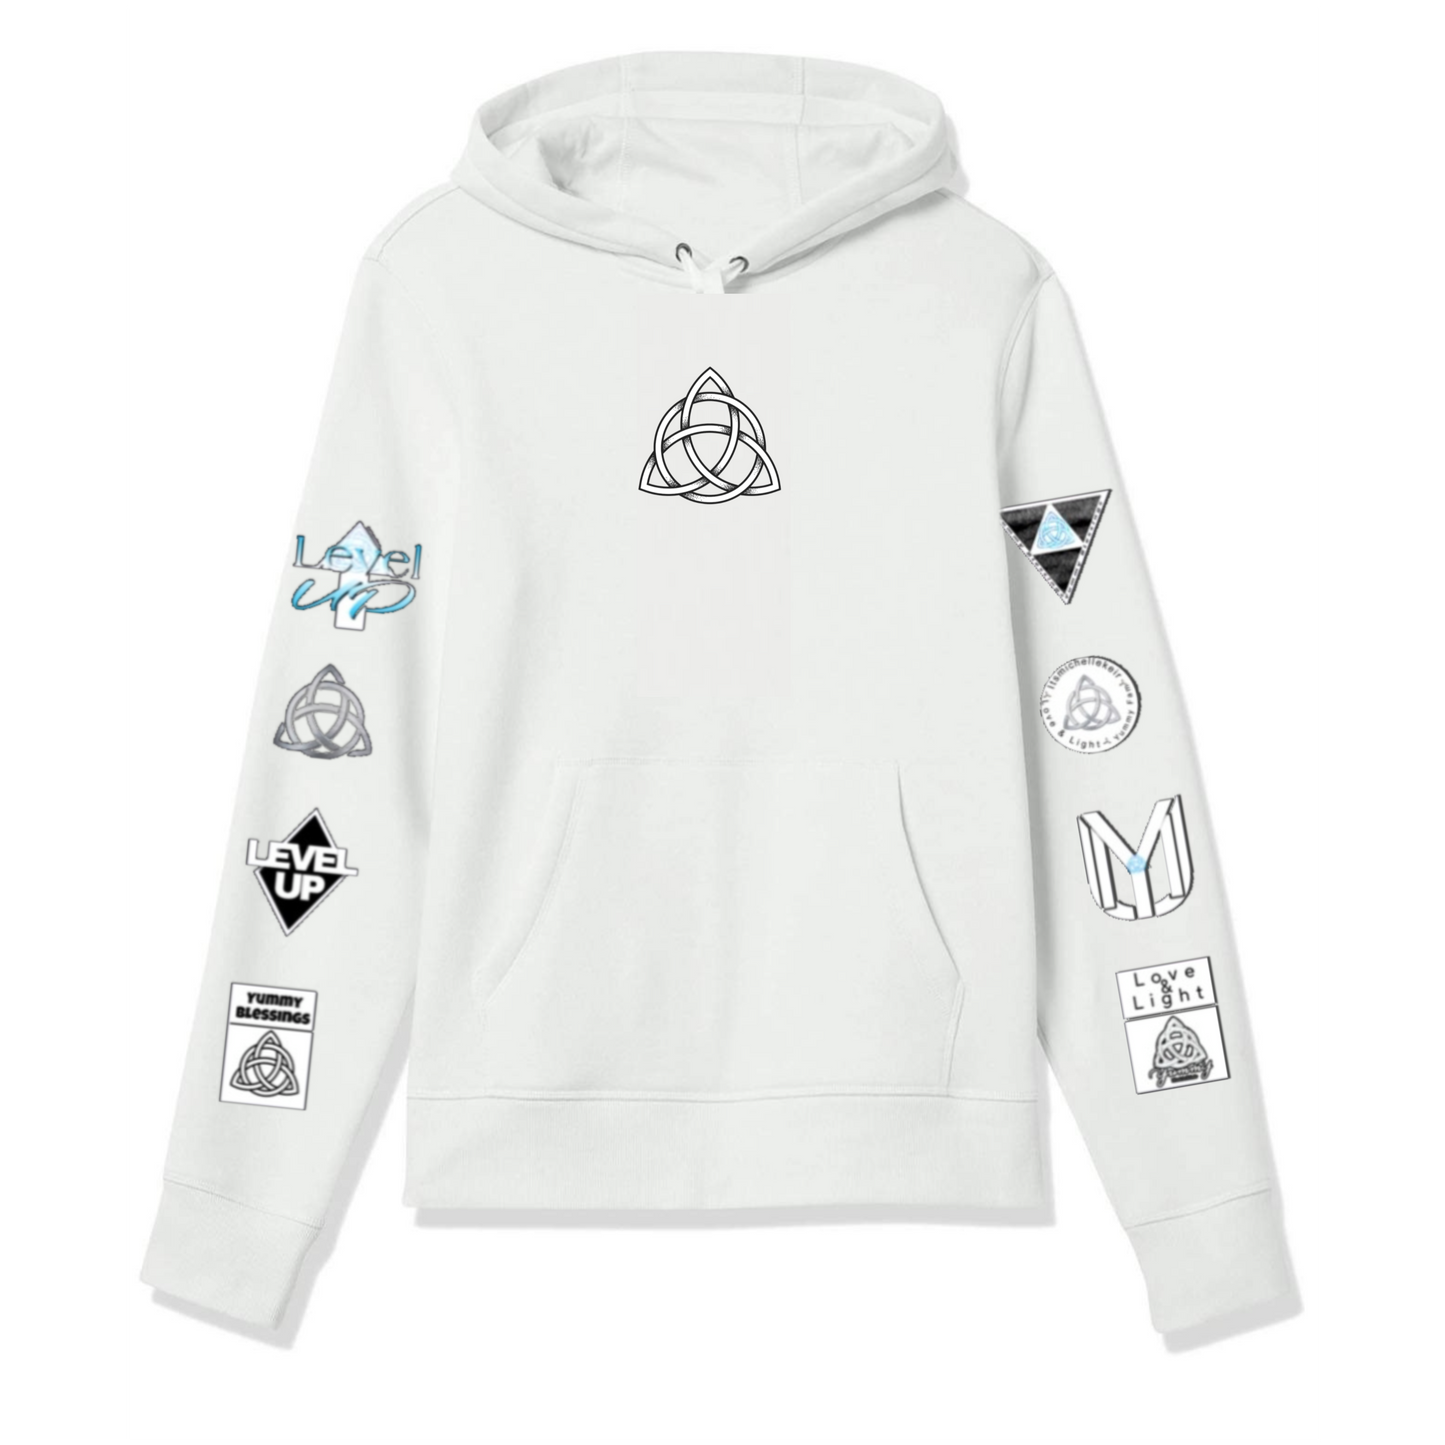 Triquetra Patch Sleeve Hoodie